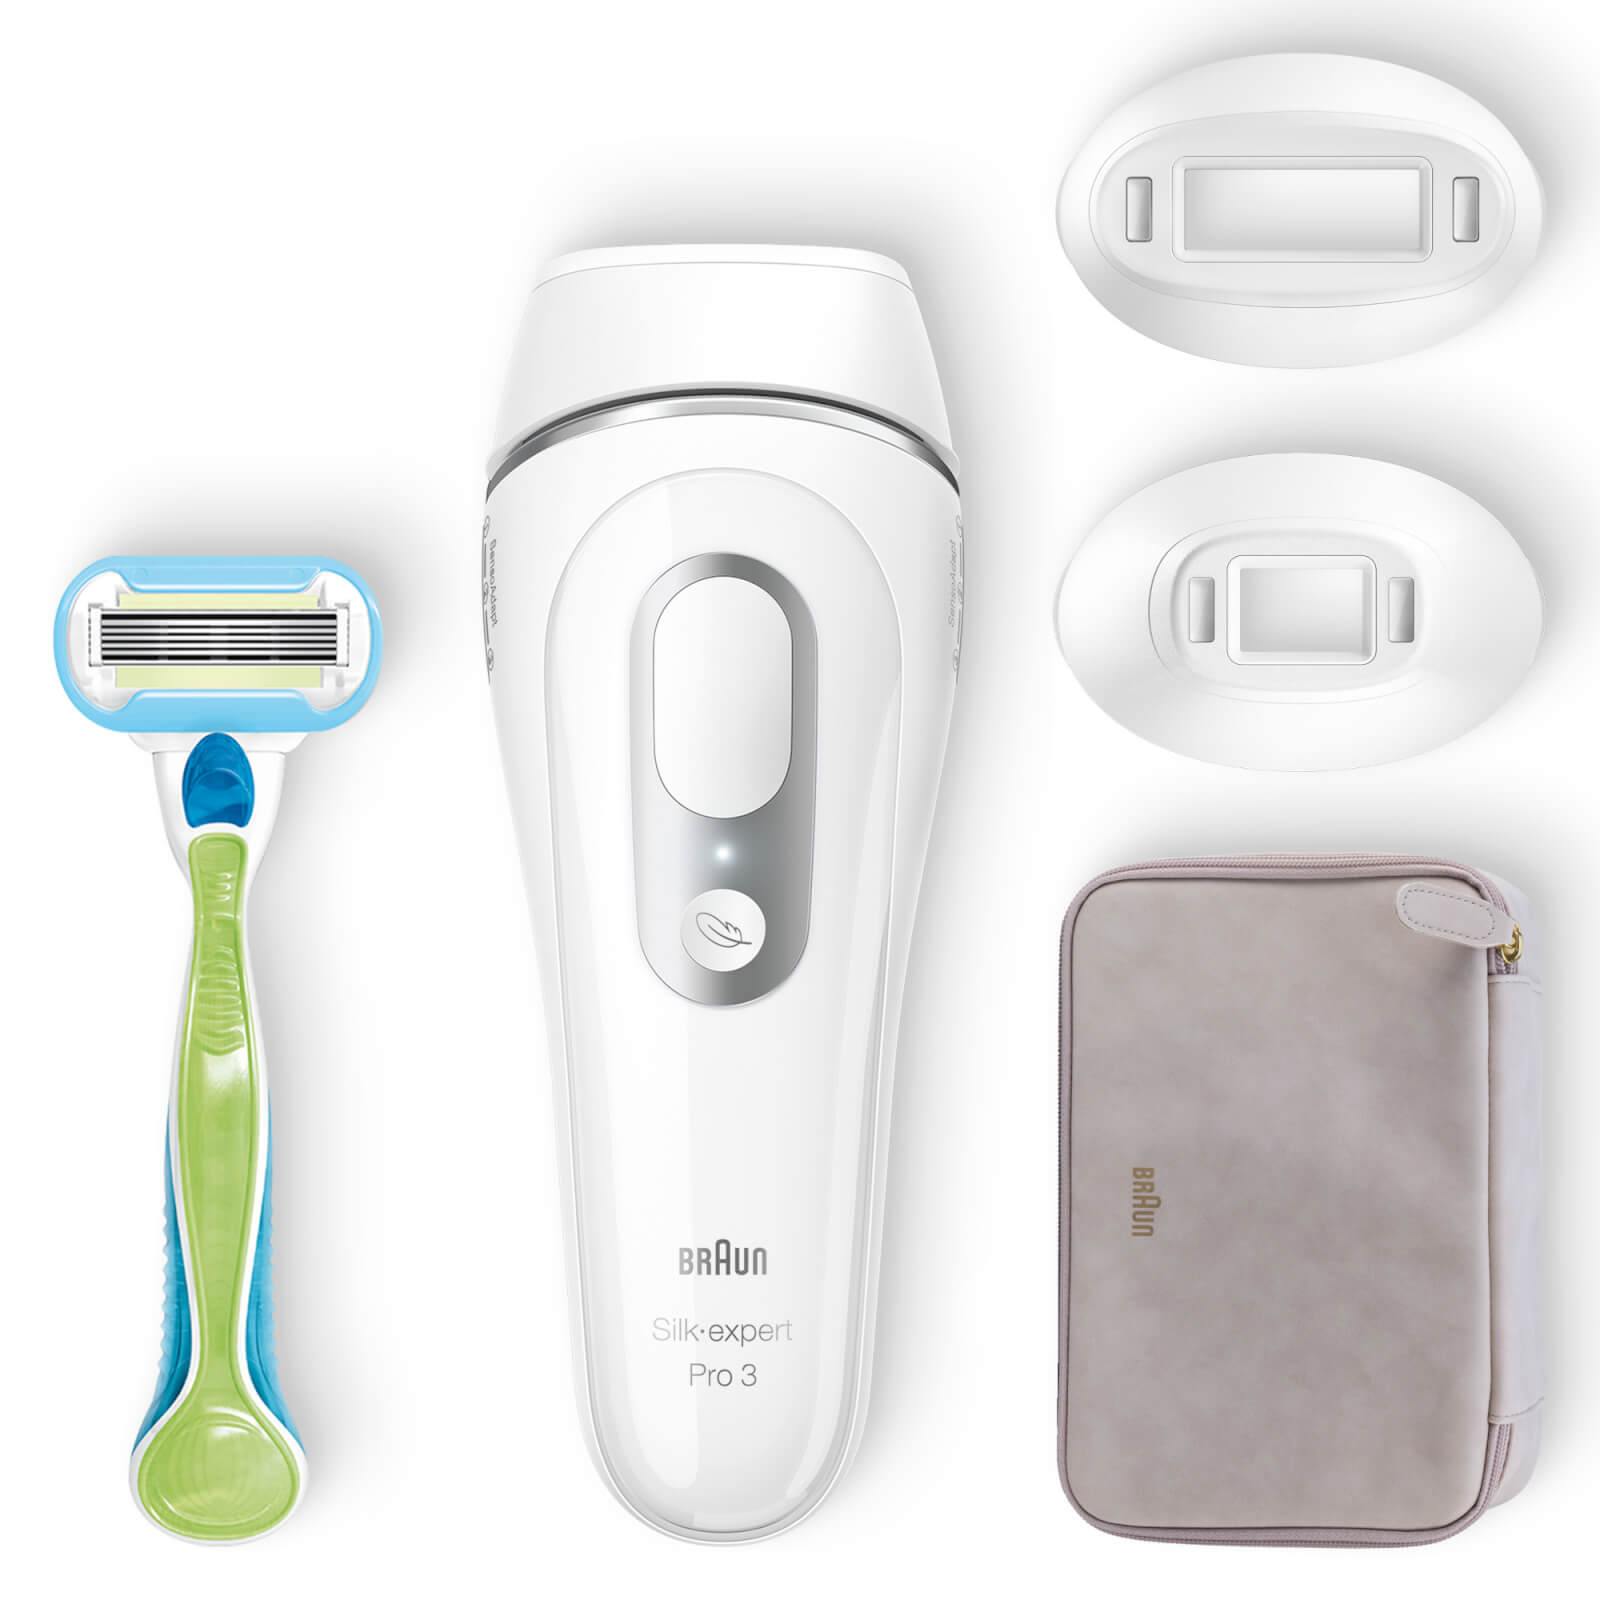 

Braun Silk·expert Pro 3 PL3233 Women’s IPL, At-Home Permanent Visible Hair Removal, White/Silver